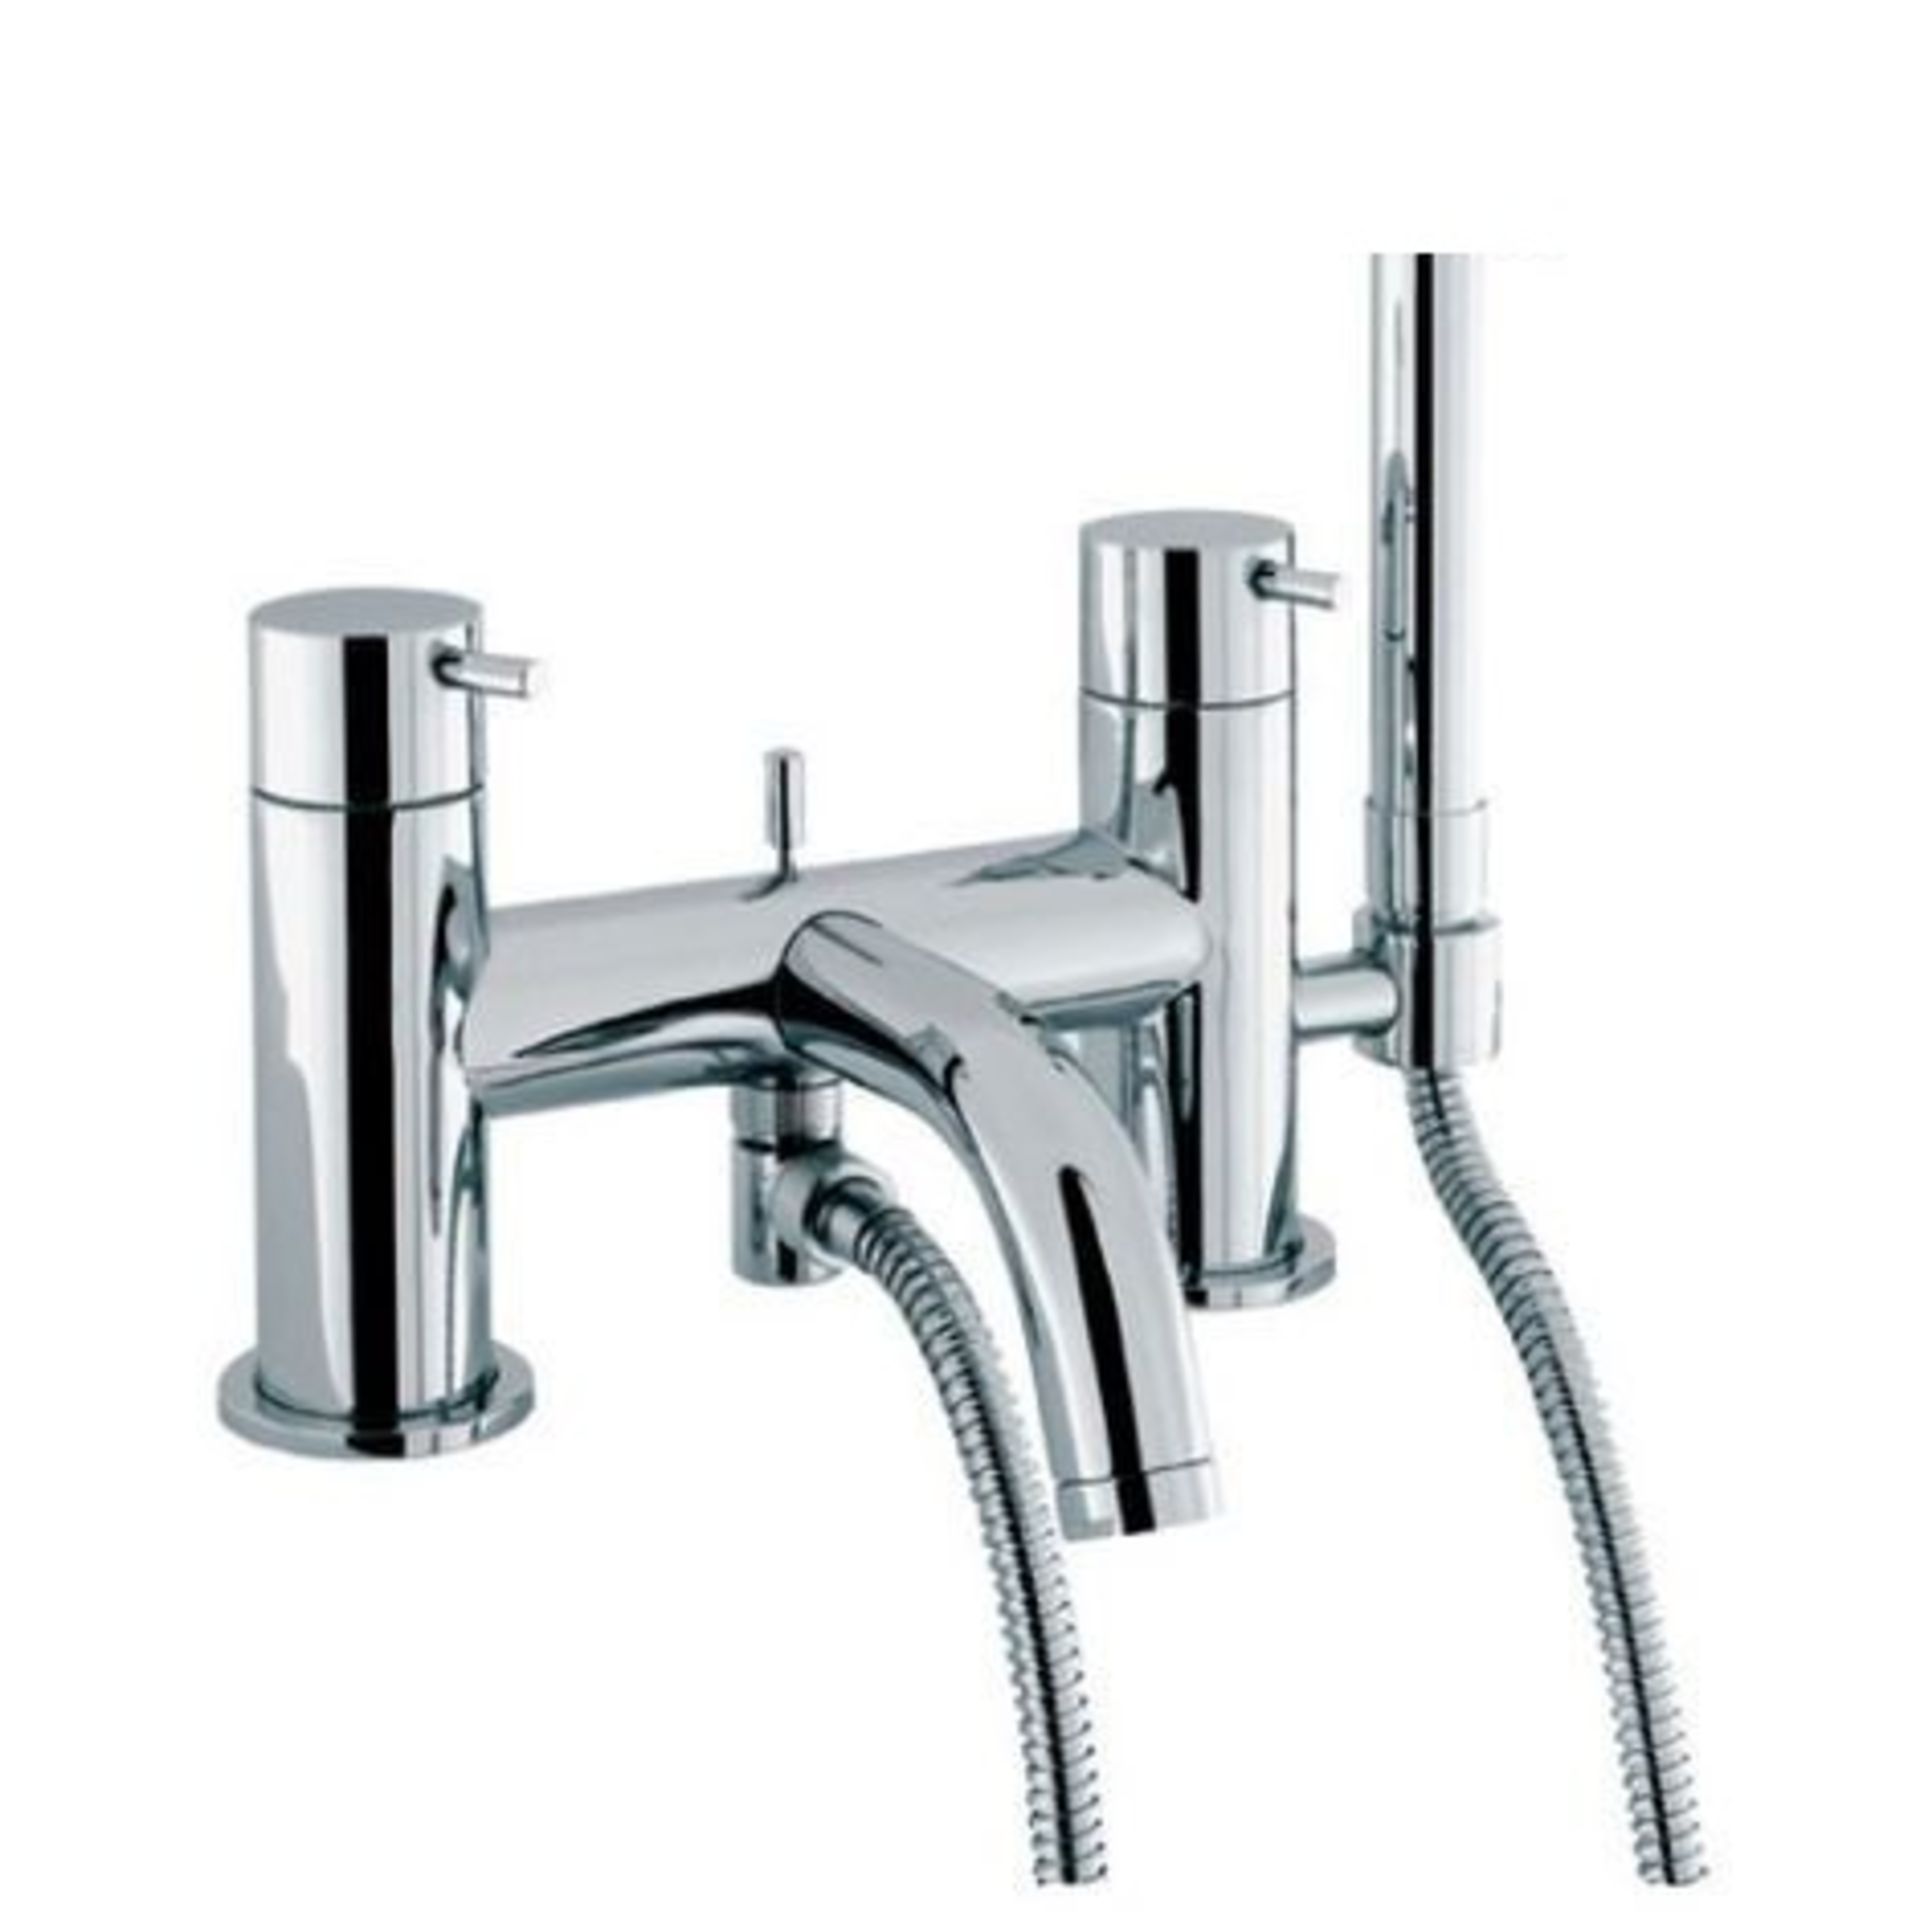 METRO HIGH QUALITY SOLID BRASS, DOUBLE DIPPED CHROME DESIGNER BATH & SHOWER MIXER TAP WITH HOSE,